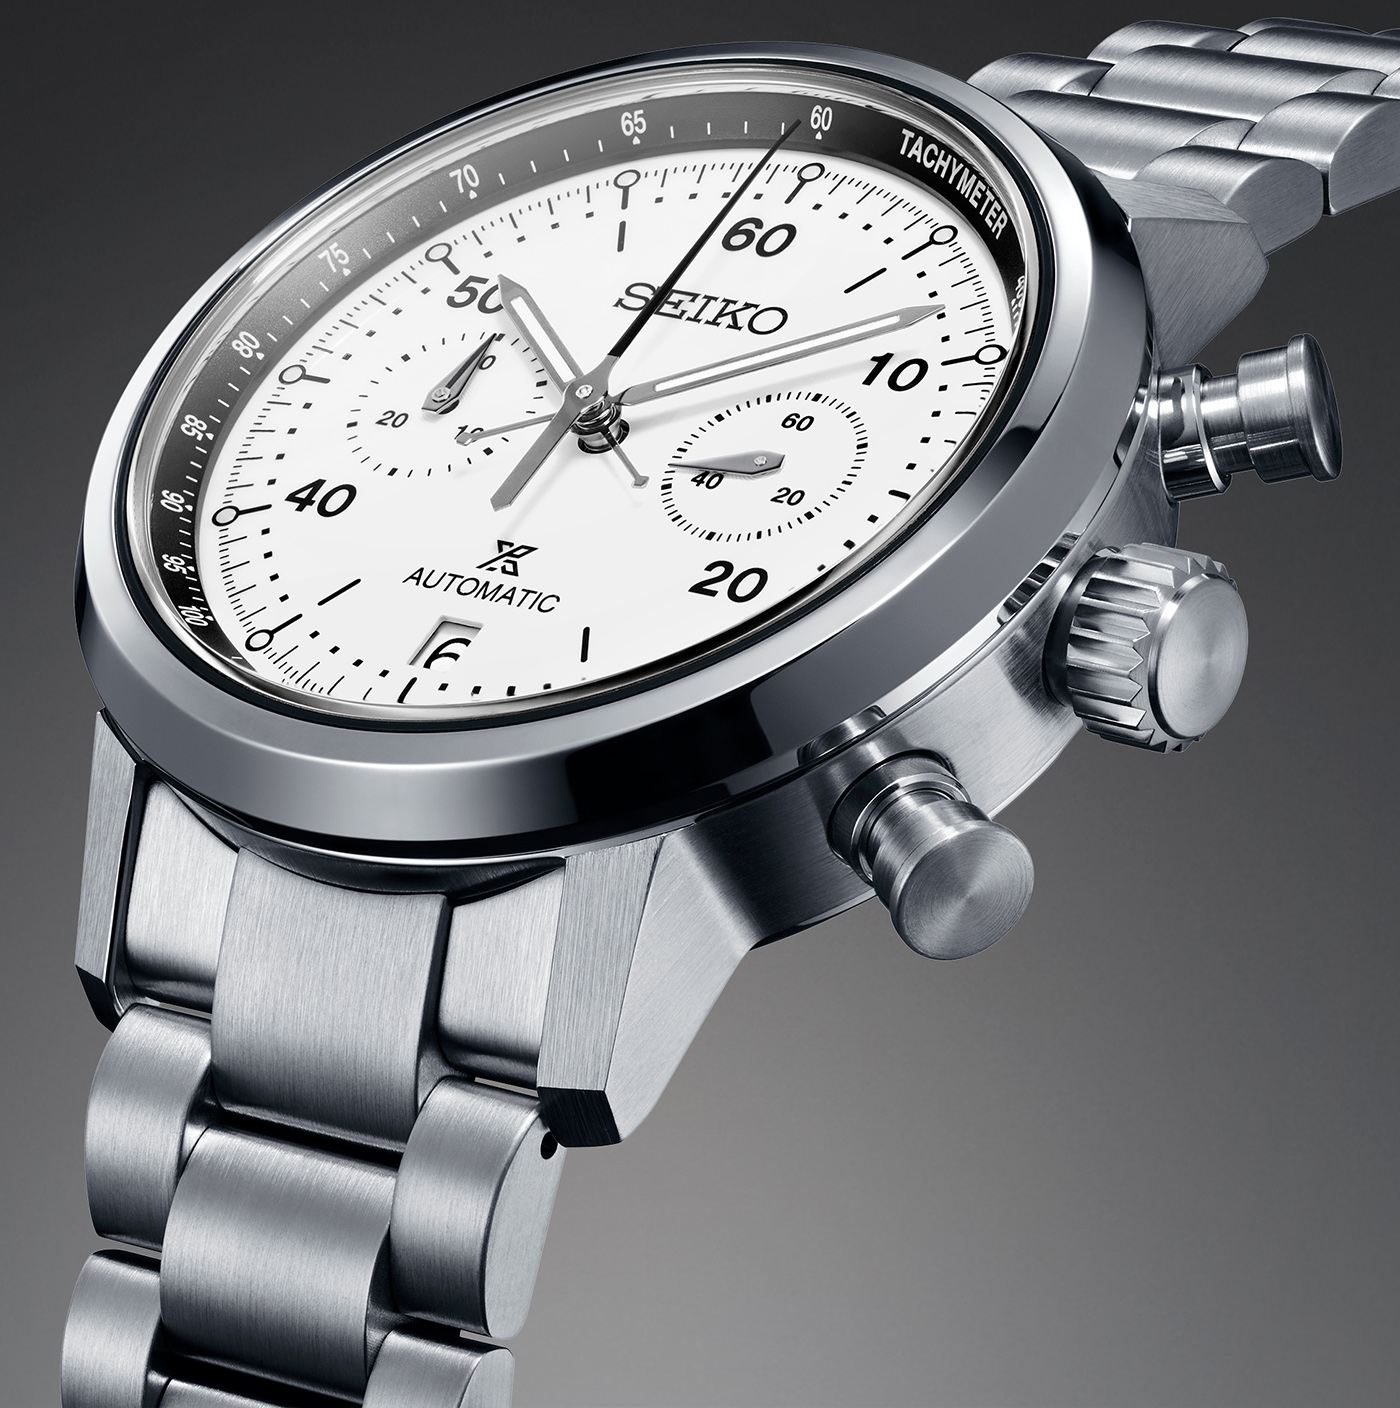 Seiko Revives Speedtimer Nameplate With New Automatic Chronograph Watches |  aBlogtoWatch